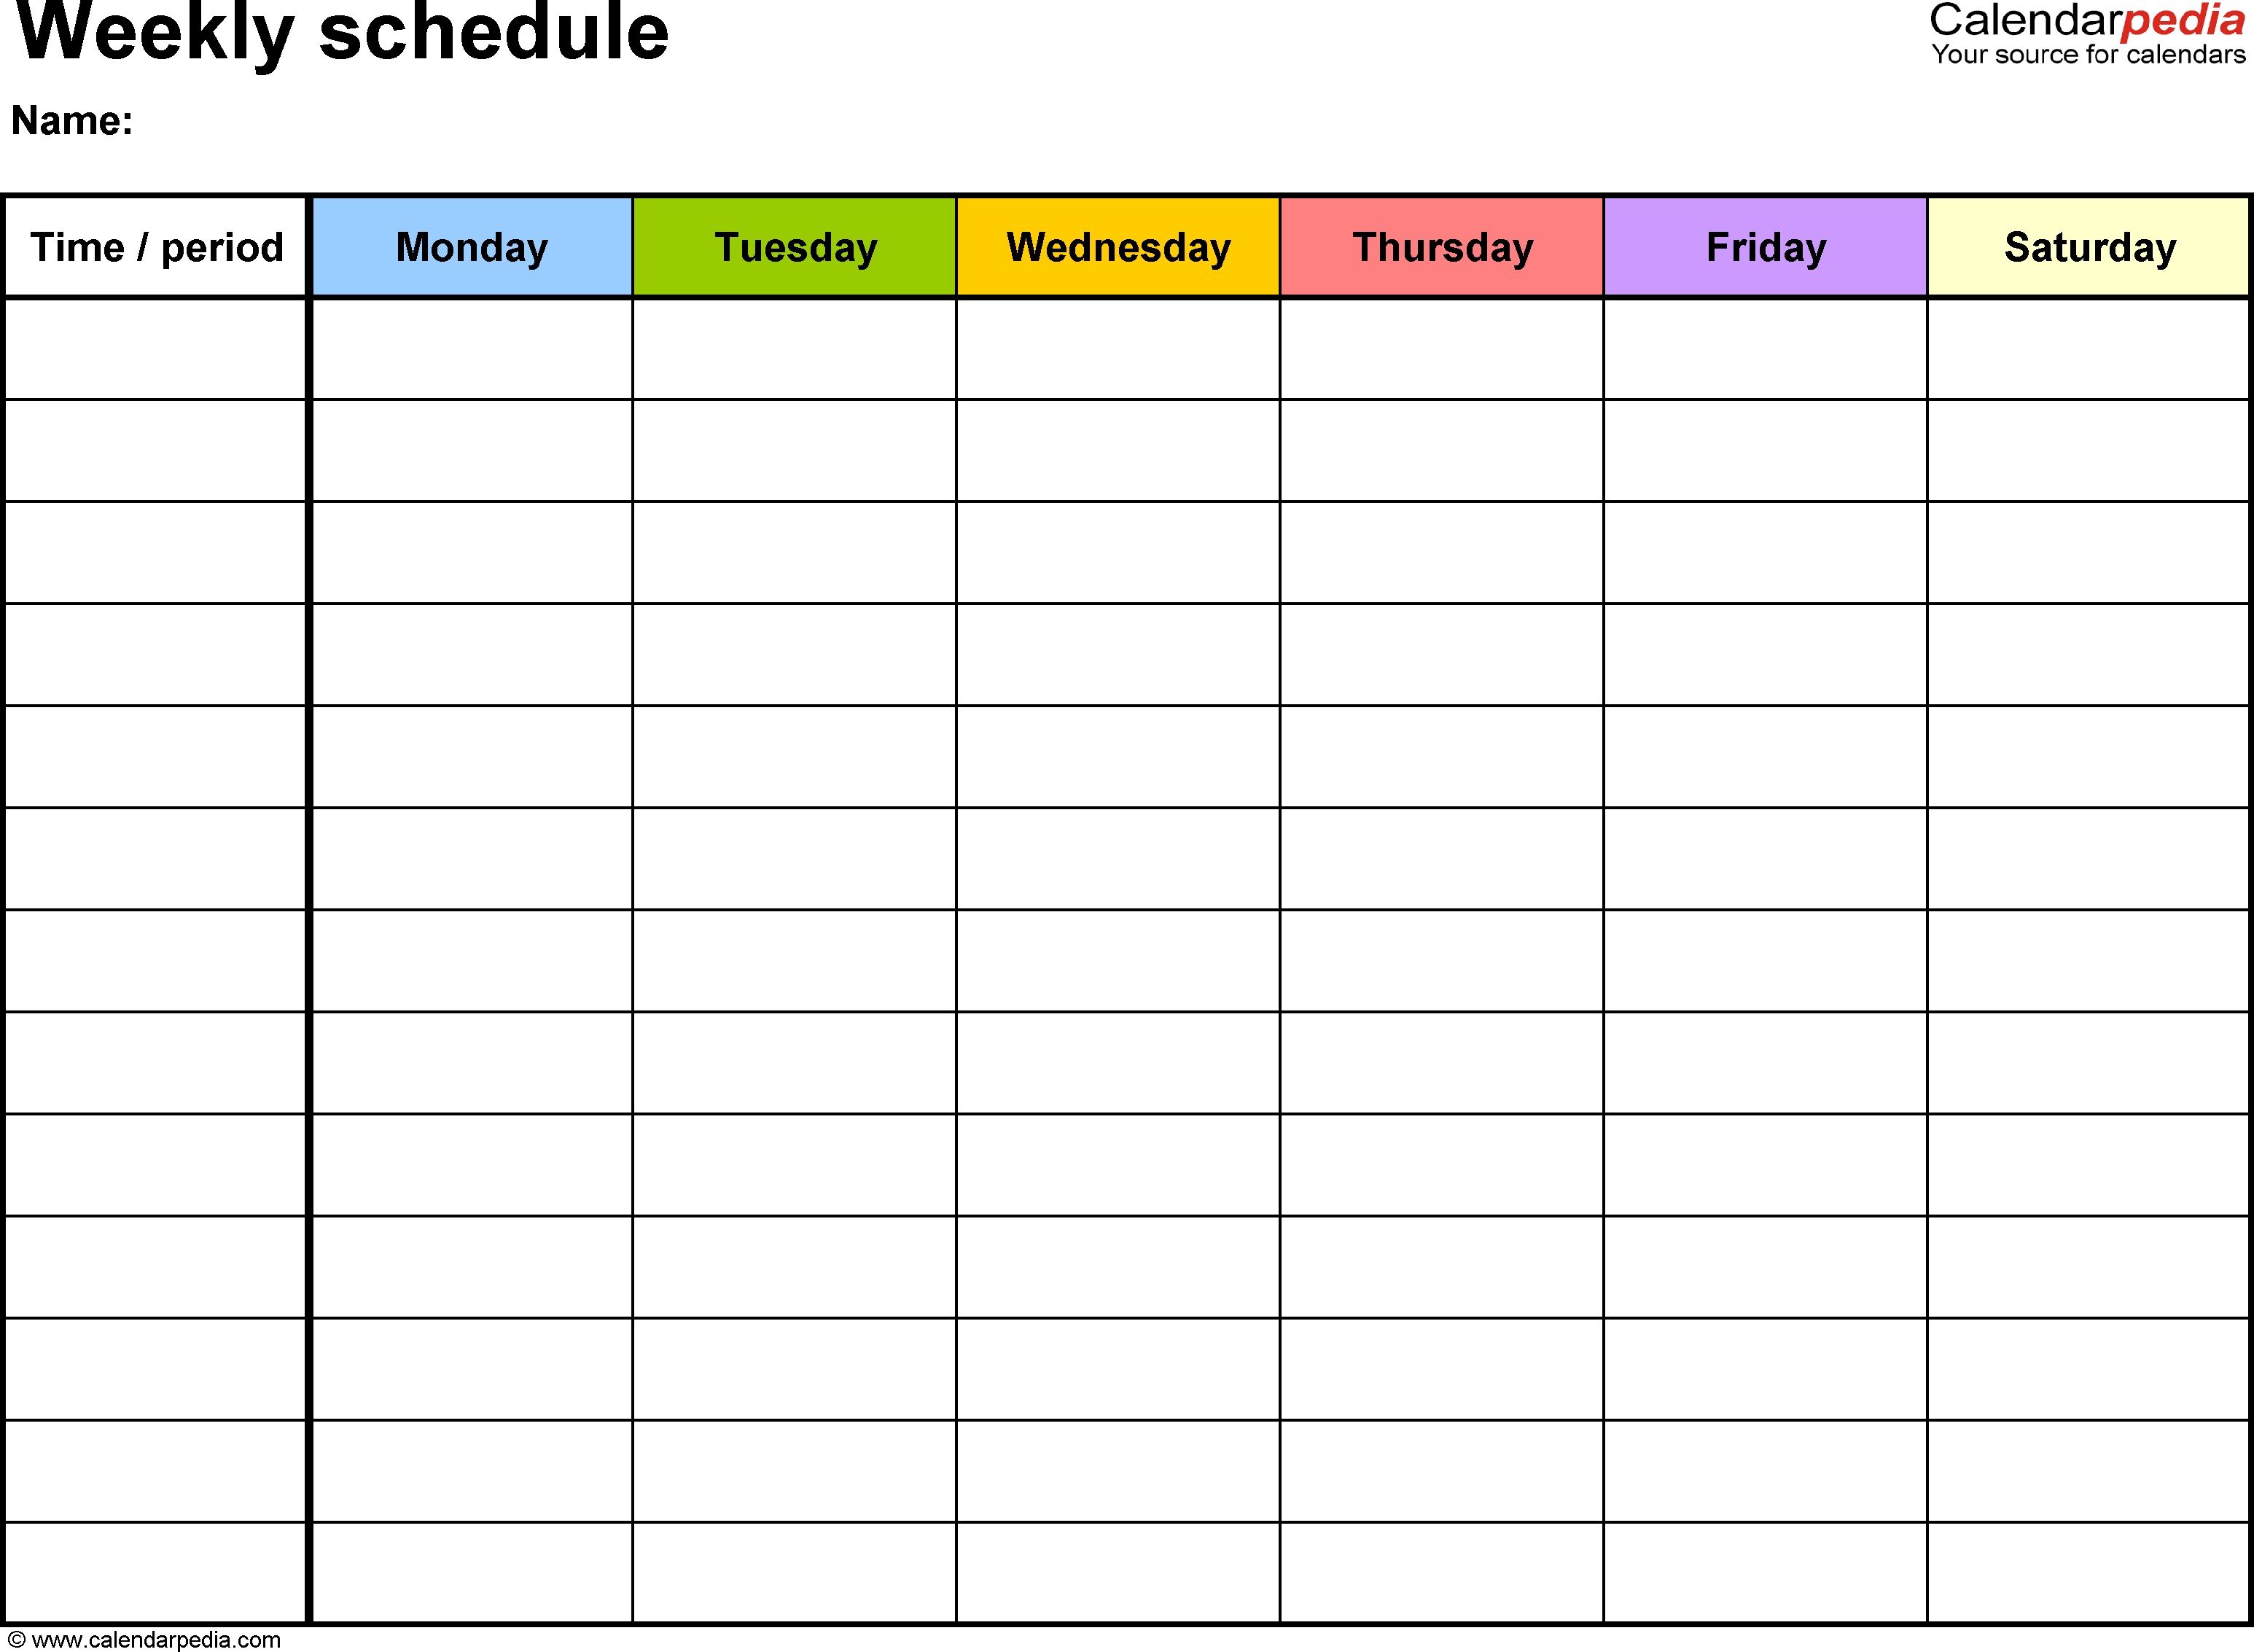 Free Weekly Schedule Templates For Word - 18 Templates-Calendar Template Monday Through Friday